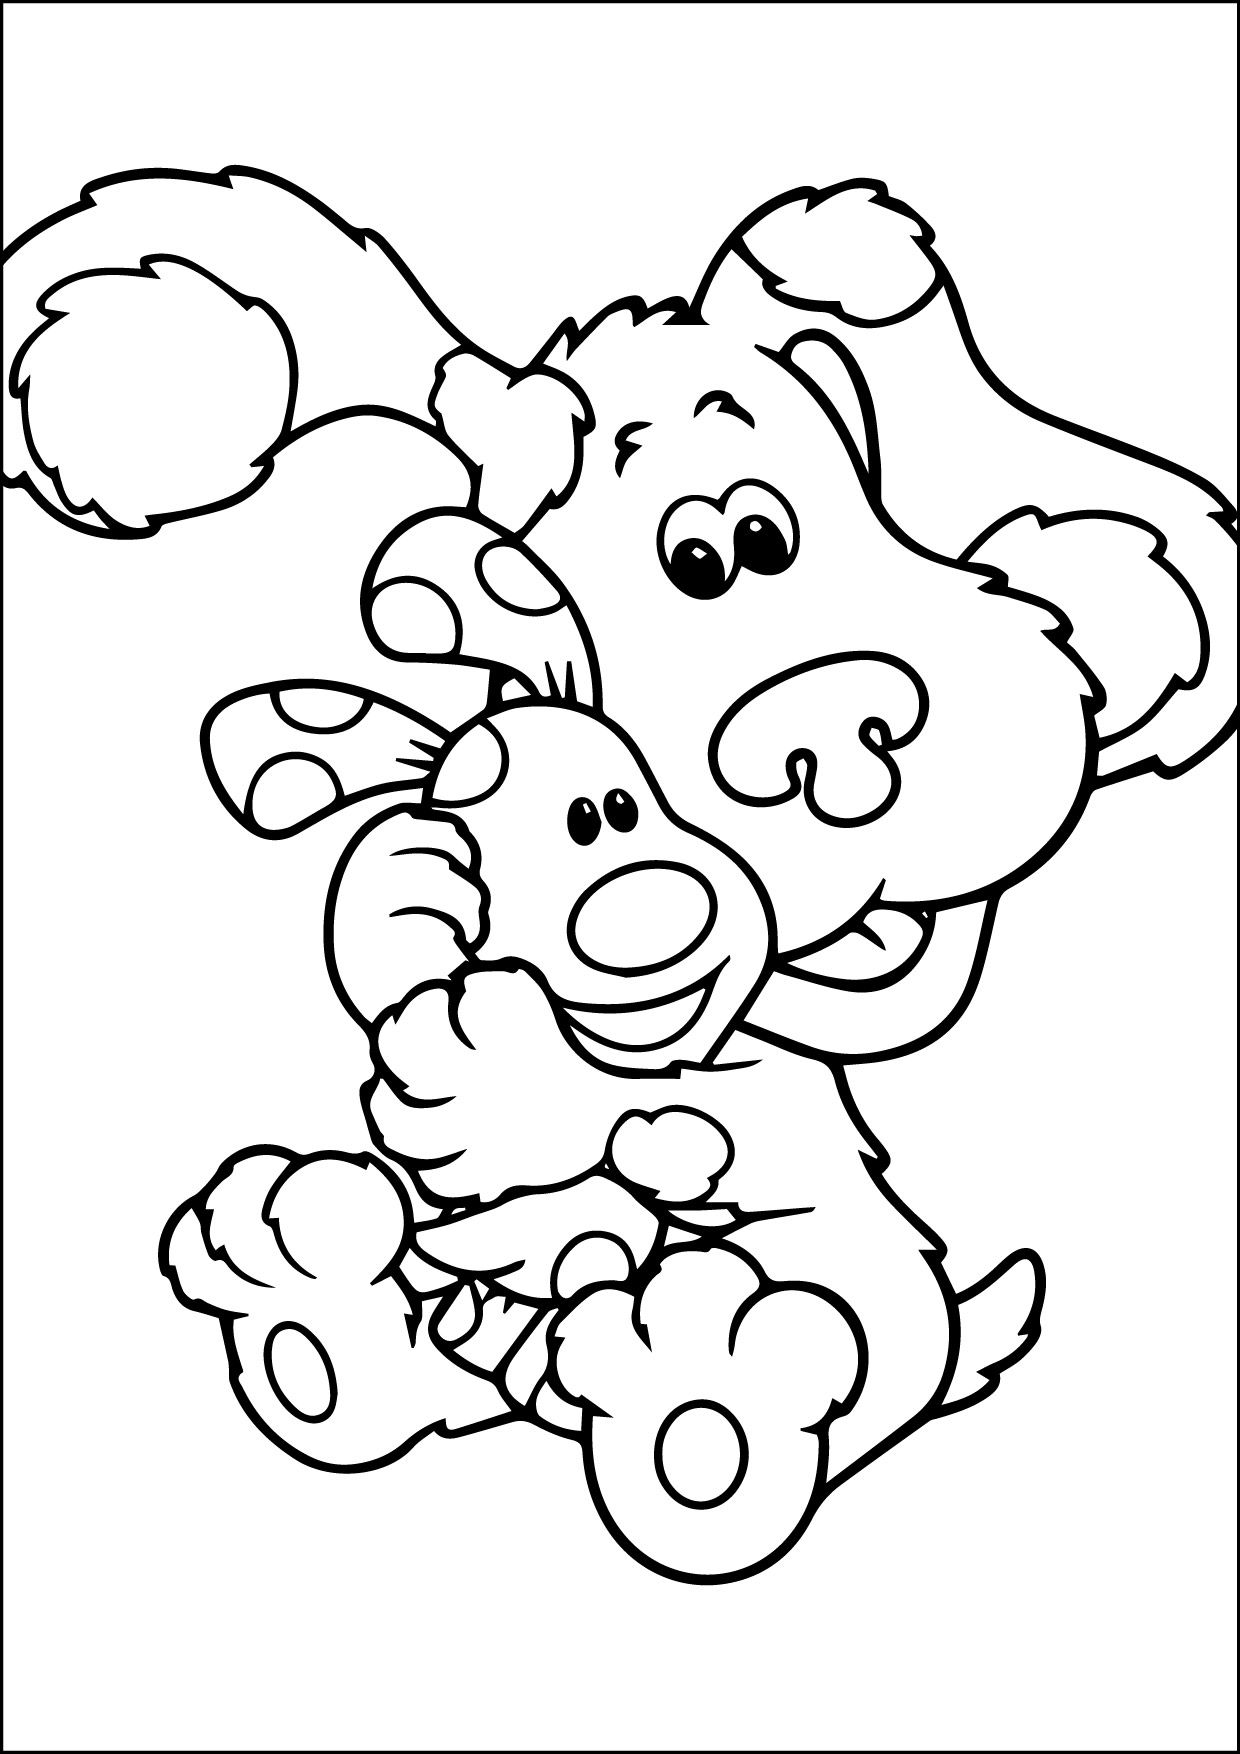 Blues Clues Printable Coloring Pages at GetColorings com Free